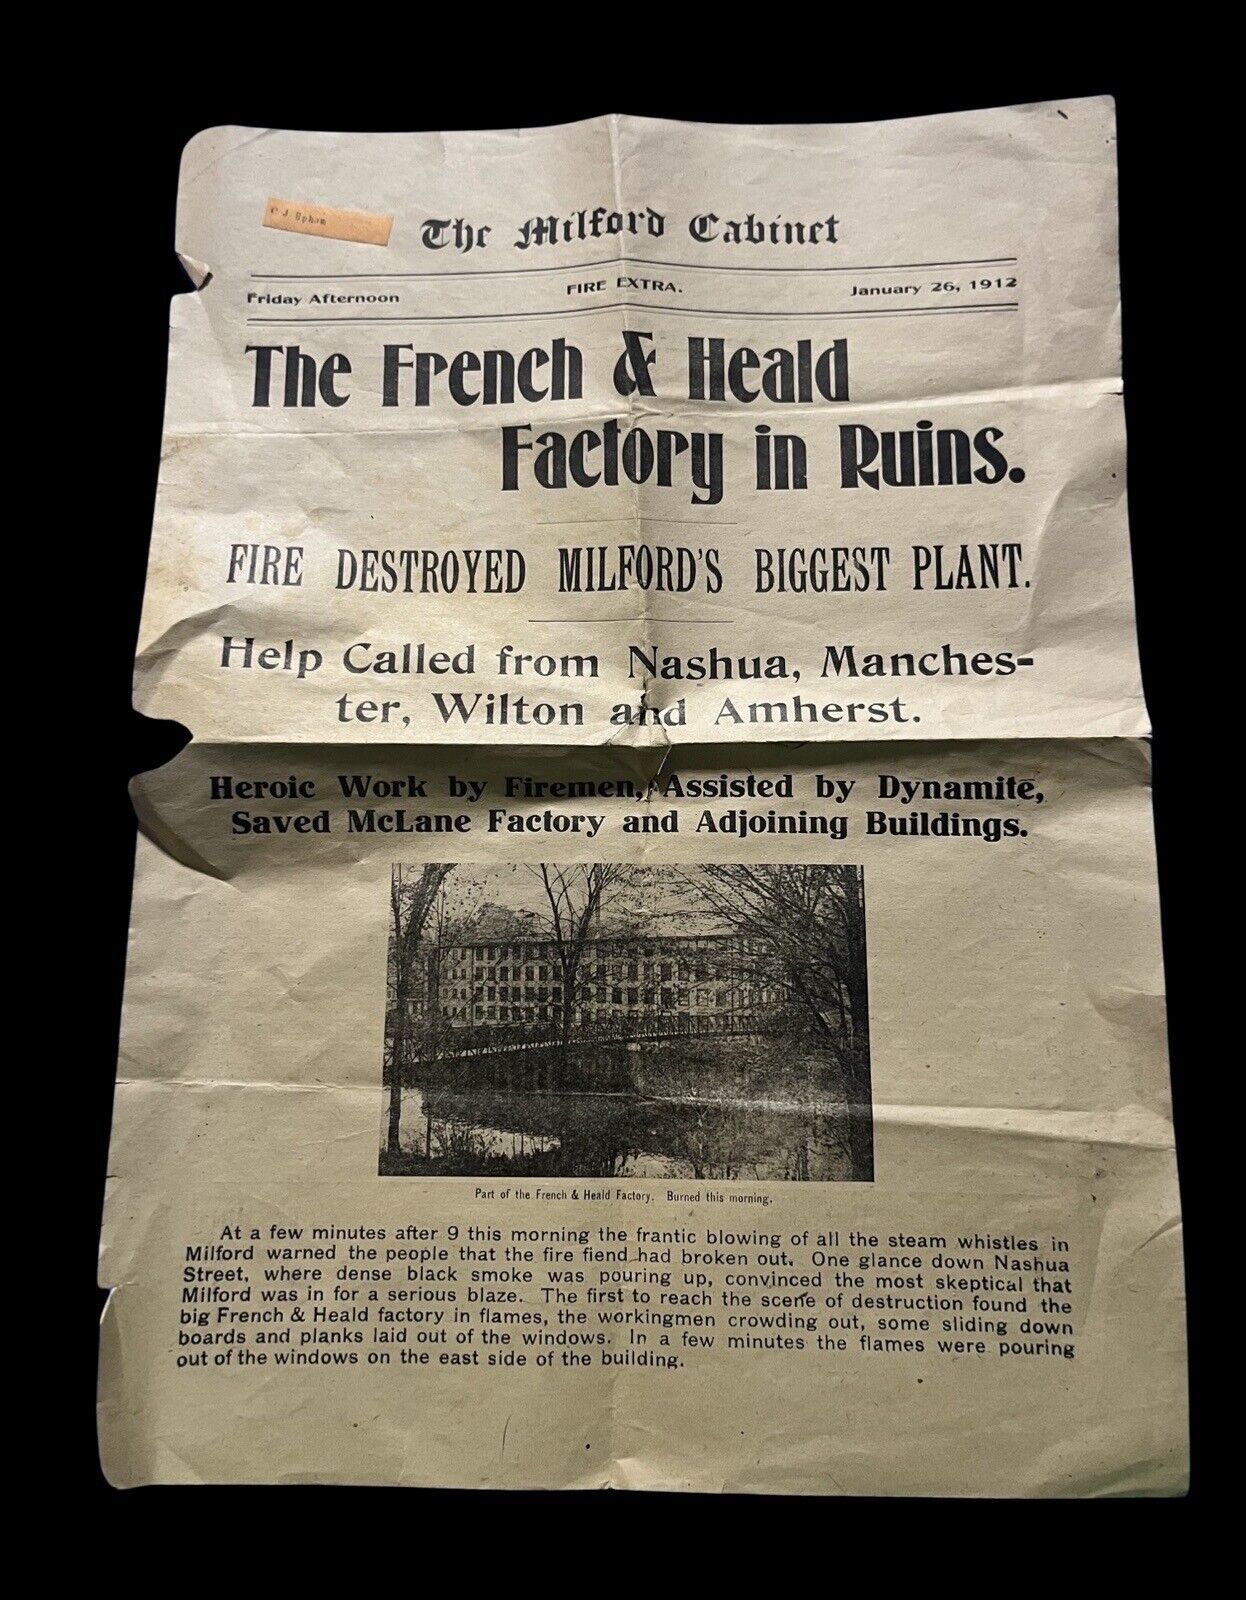 Vintage Newspaper Clipping The Milford Cabinet January 26, 1912 Factory In Ruins